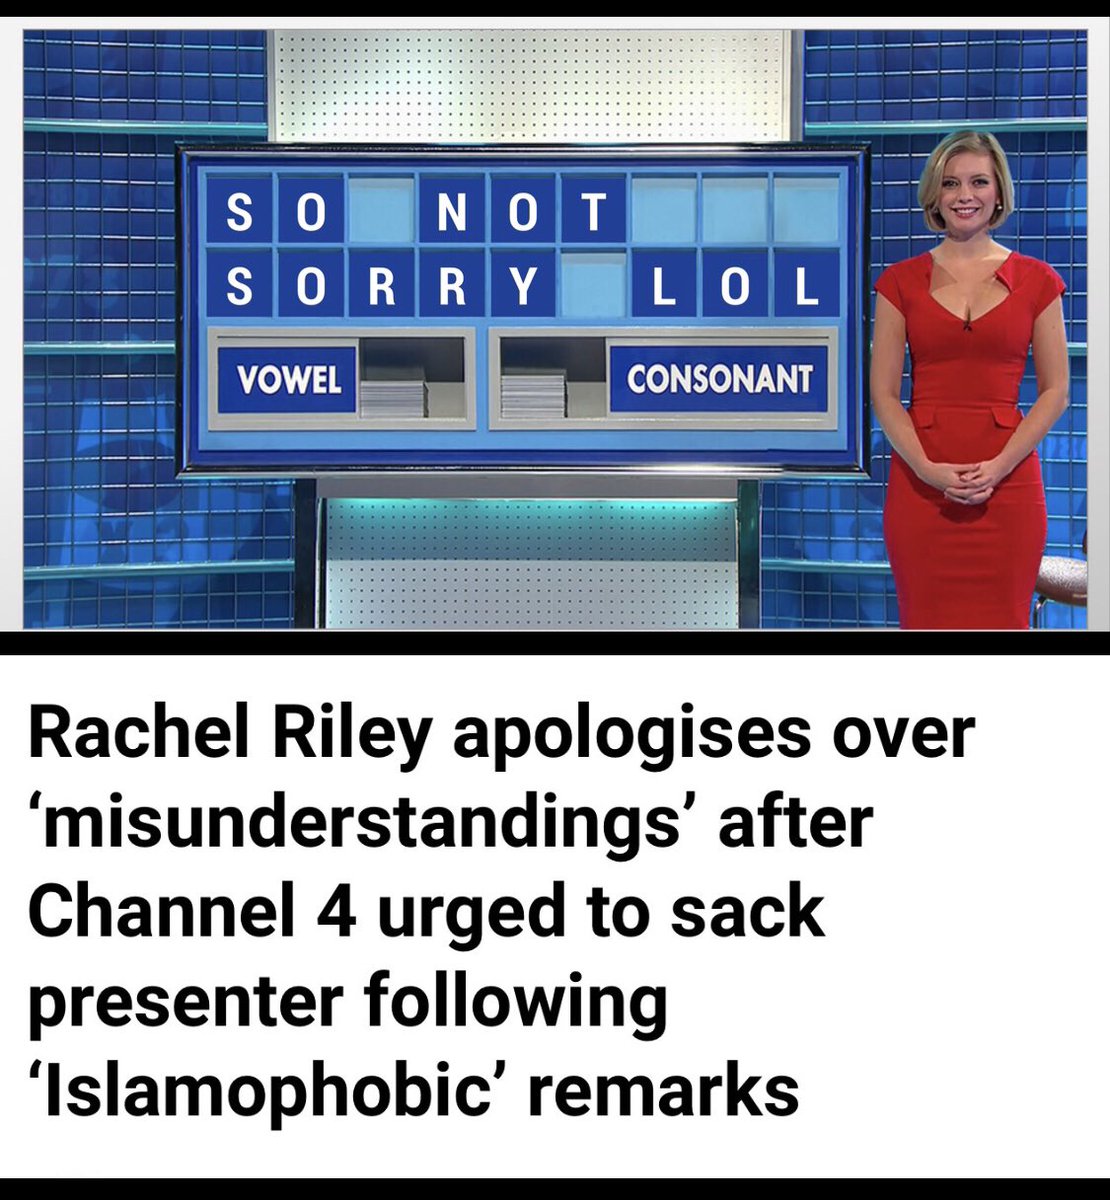 Riley’s non apology: “I am sorry if this message was misunderstood, that was not my intention”. It was absolutely her intention.